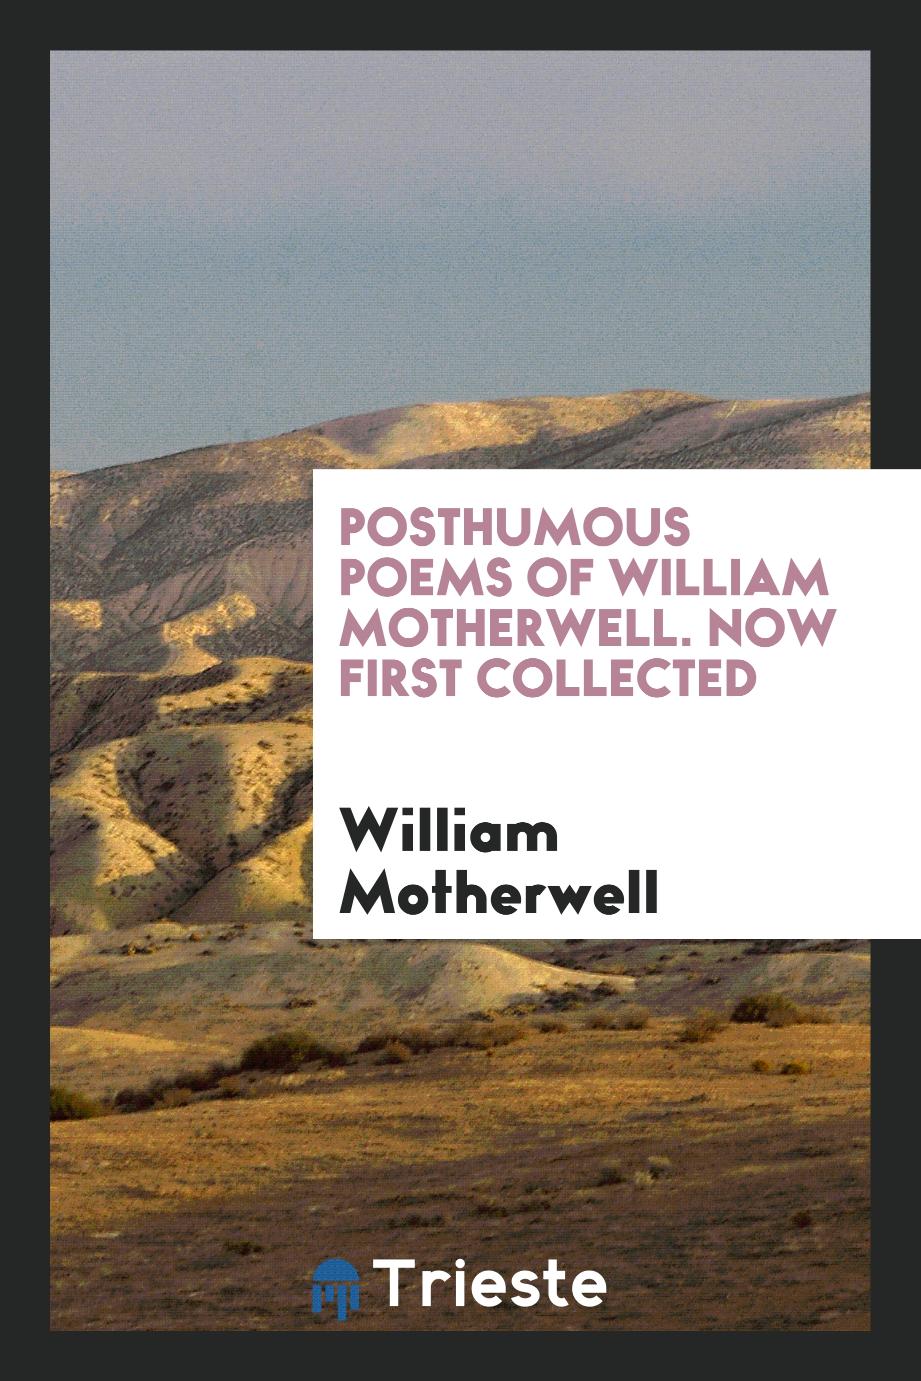 Posthumous poems of William Motherwell. Now first collected